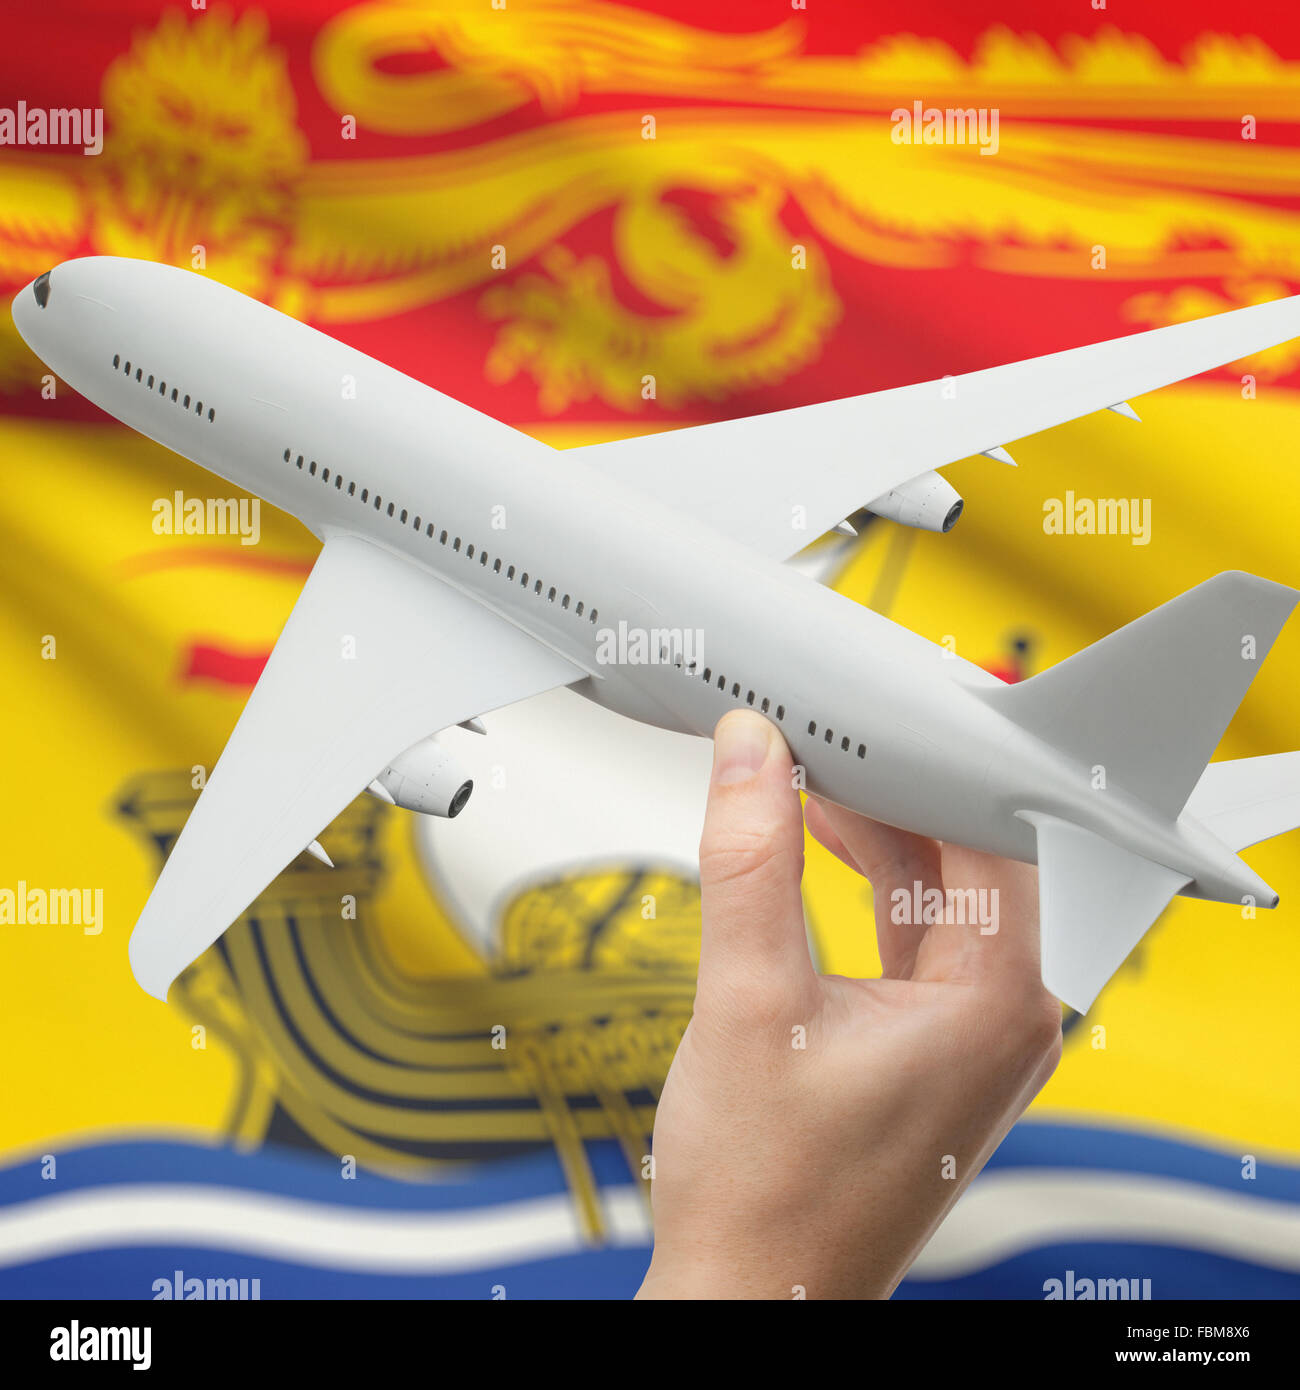 Airplane in hand with Canadian province or territory flag on background series - New Brunswick Stock Photo